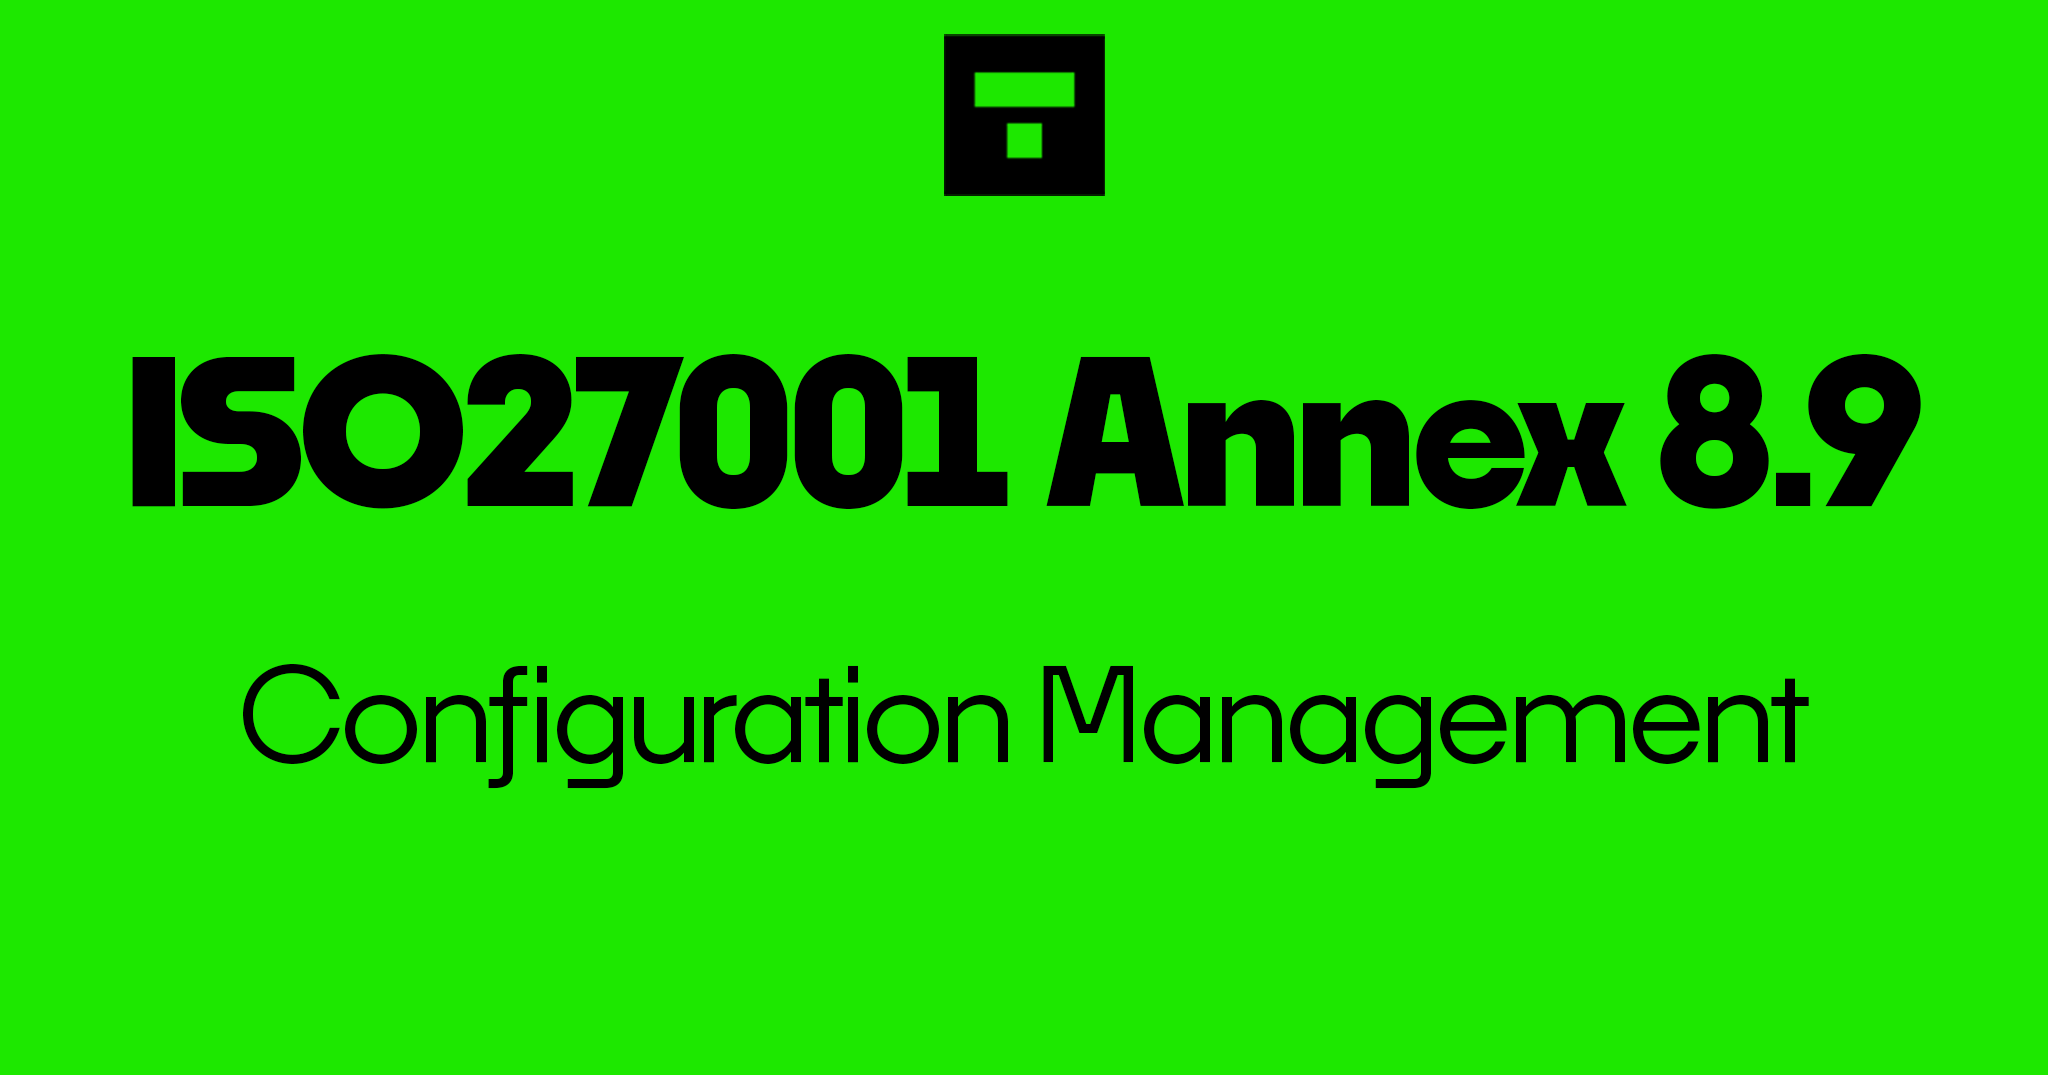 How to Implement ISO 27001 Annex A 8.9 Configuration Management